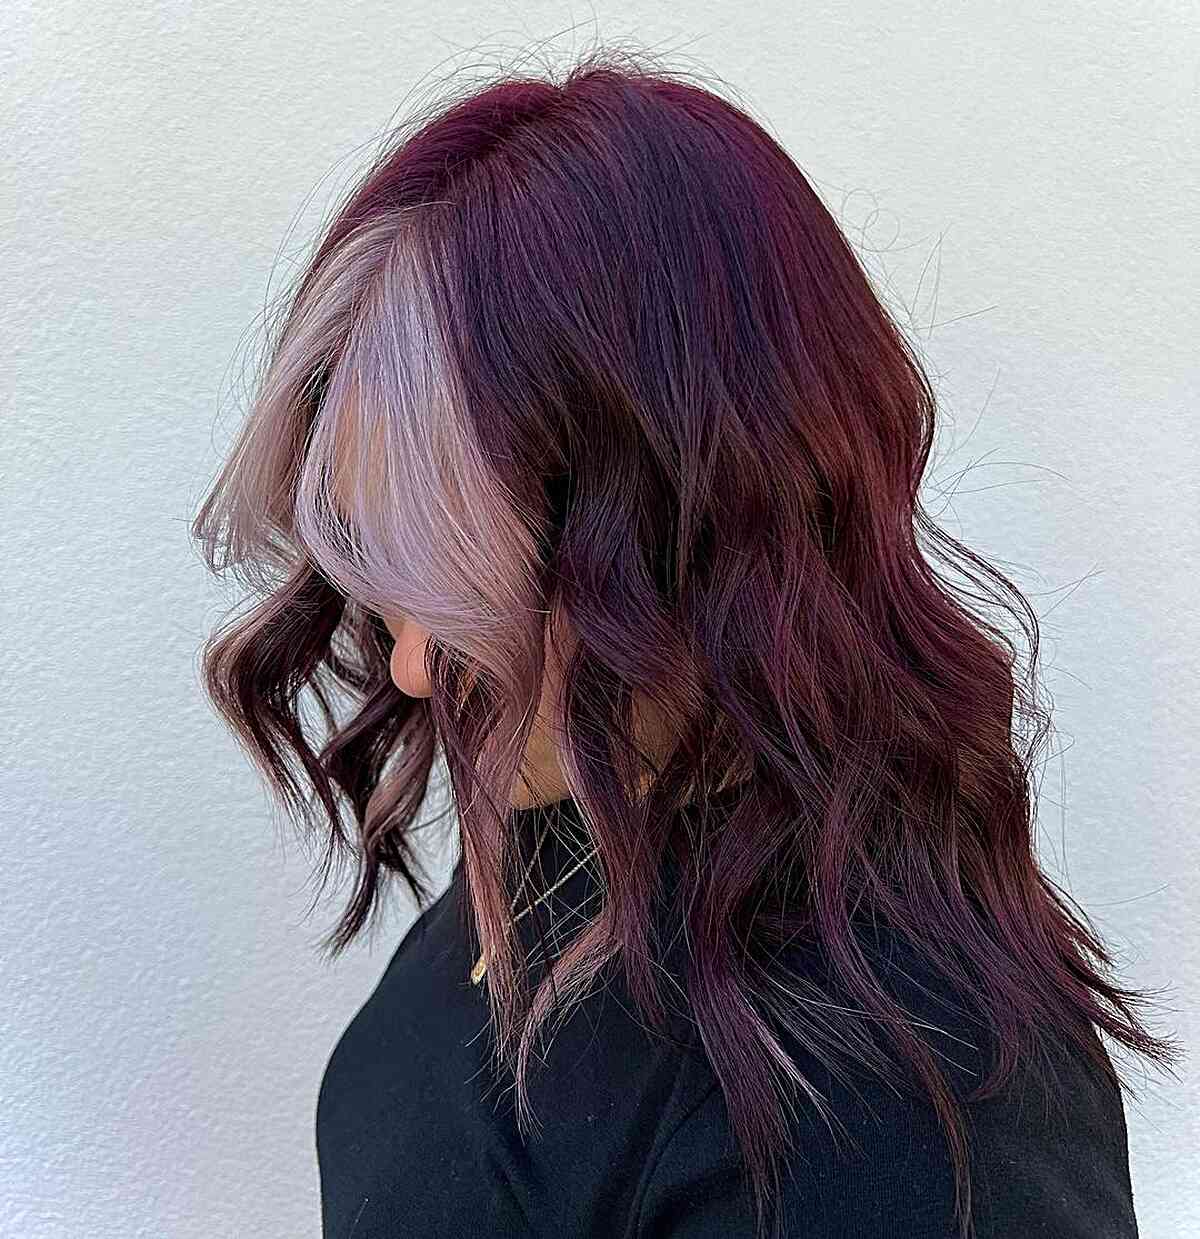 Deep Burgundy Red-Violet with Silver Face-Framing Highlights on Mid-Length Choppy Hair